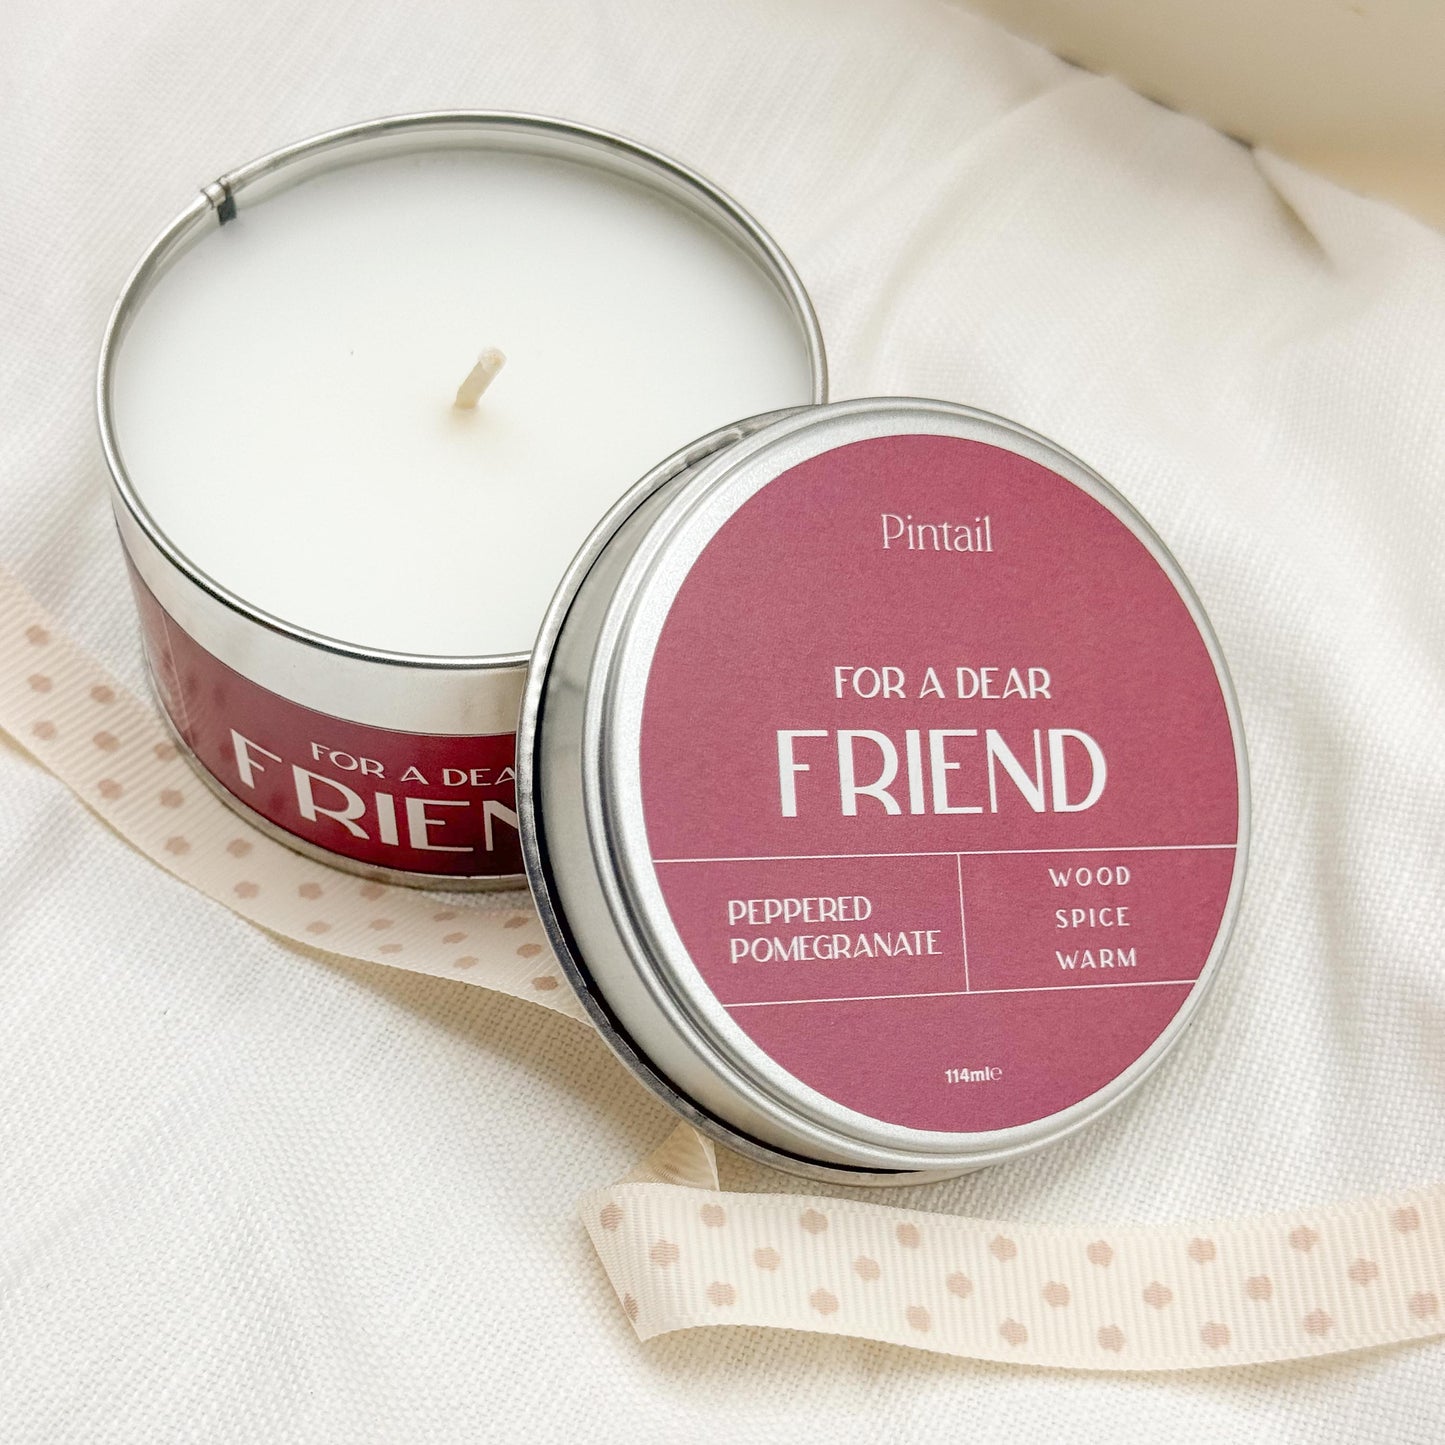 'For a Dear Friend' Peppered Pomegranate Occasion Candle